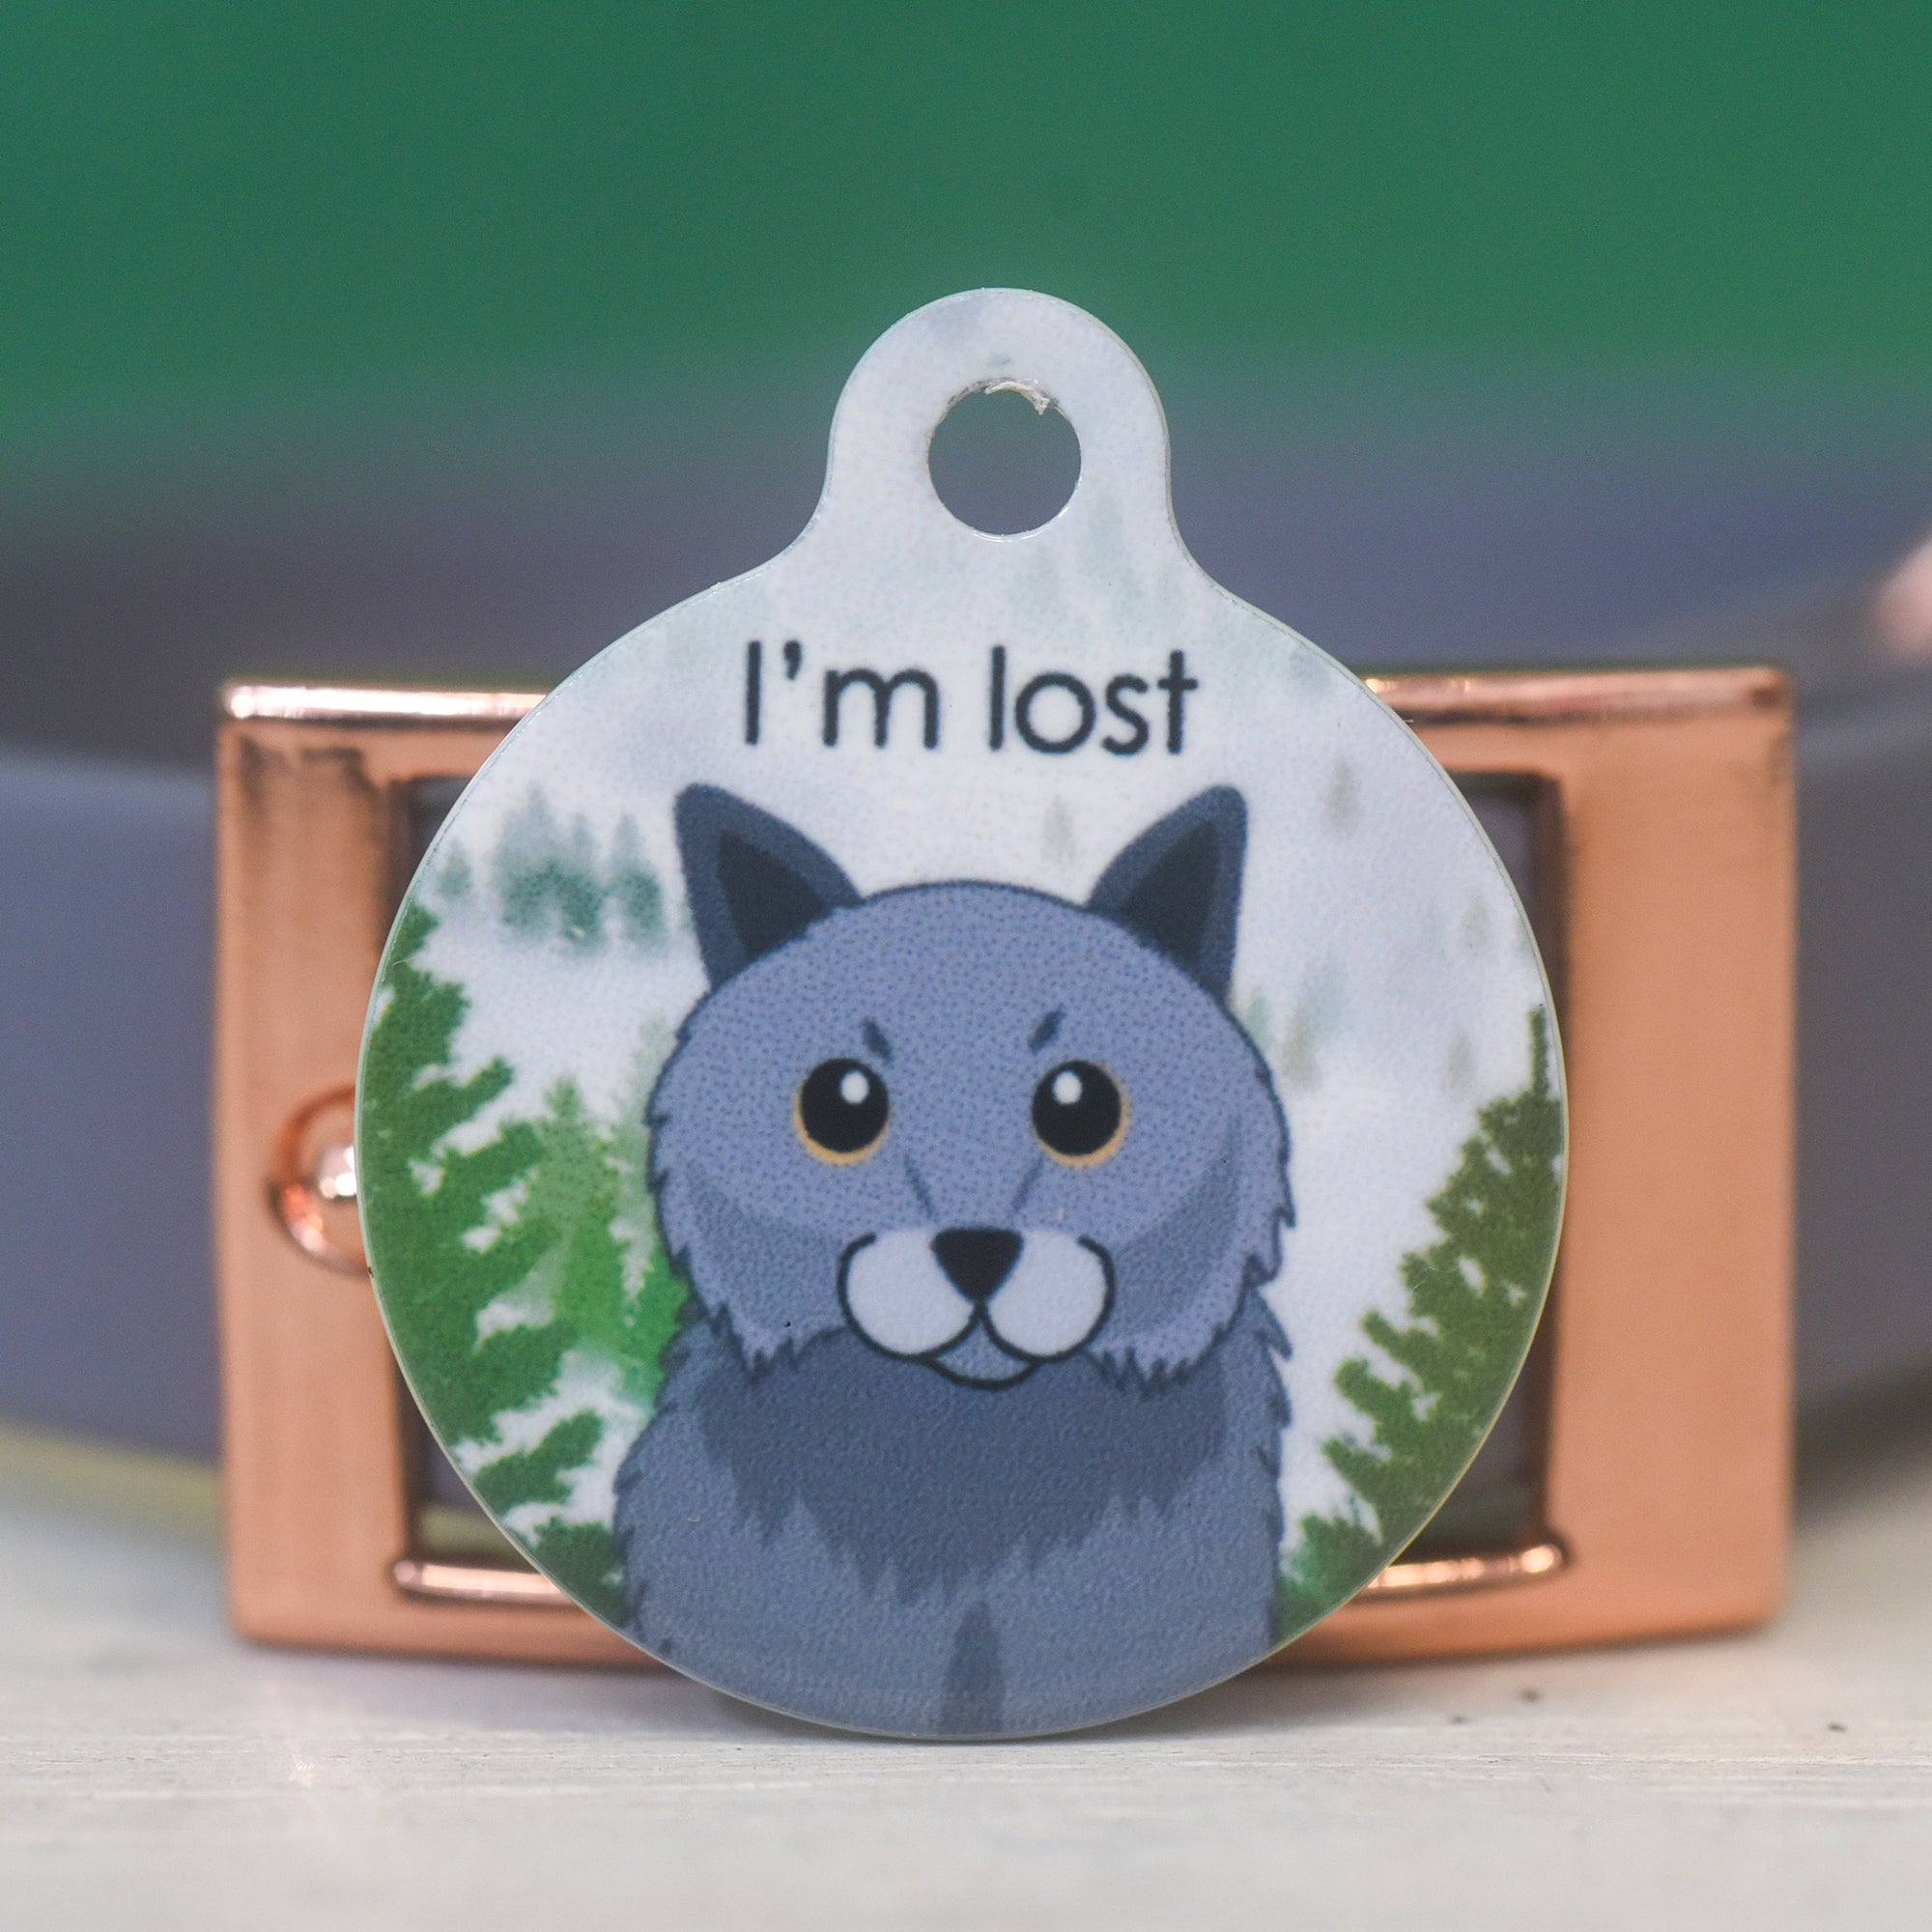 Cat Tag Personalised with Foggy Forest Design for Cat Collar ID Tags